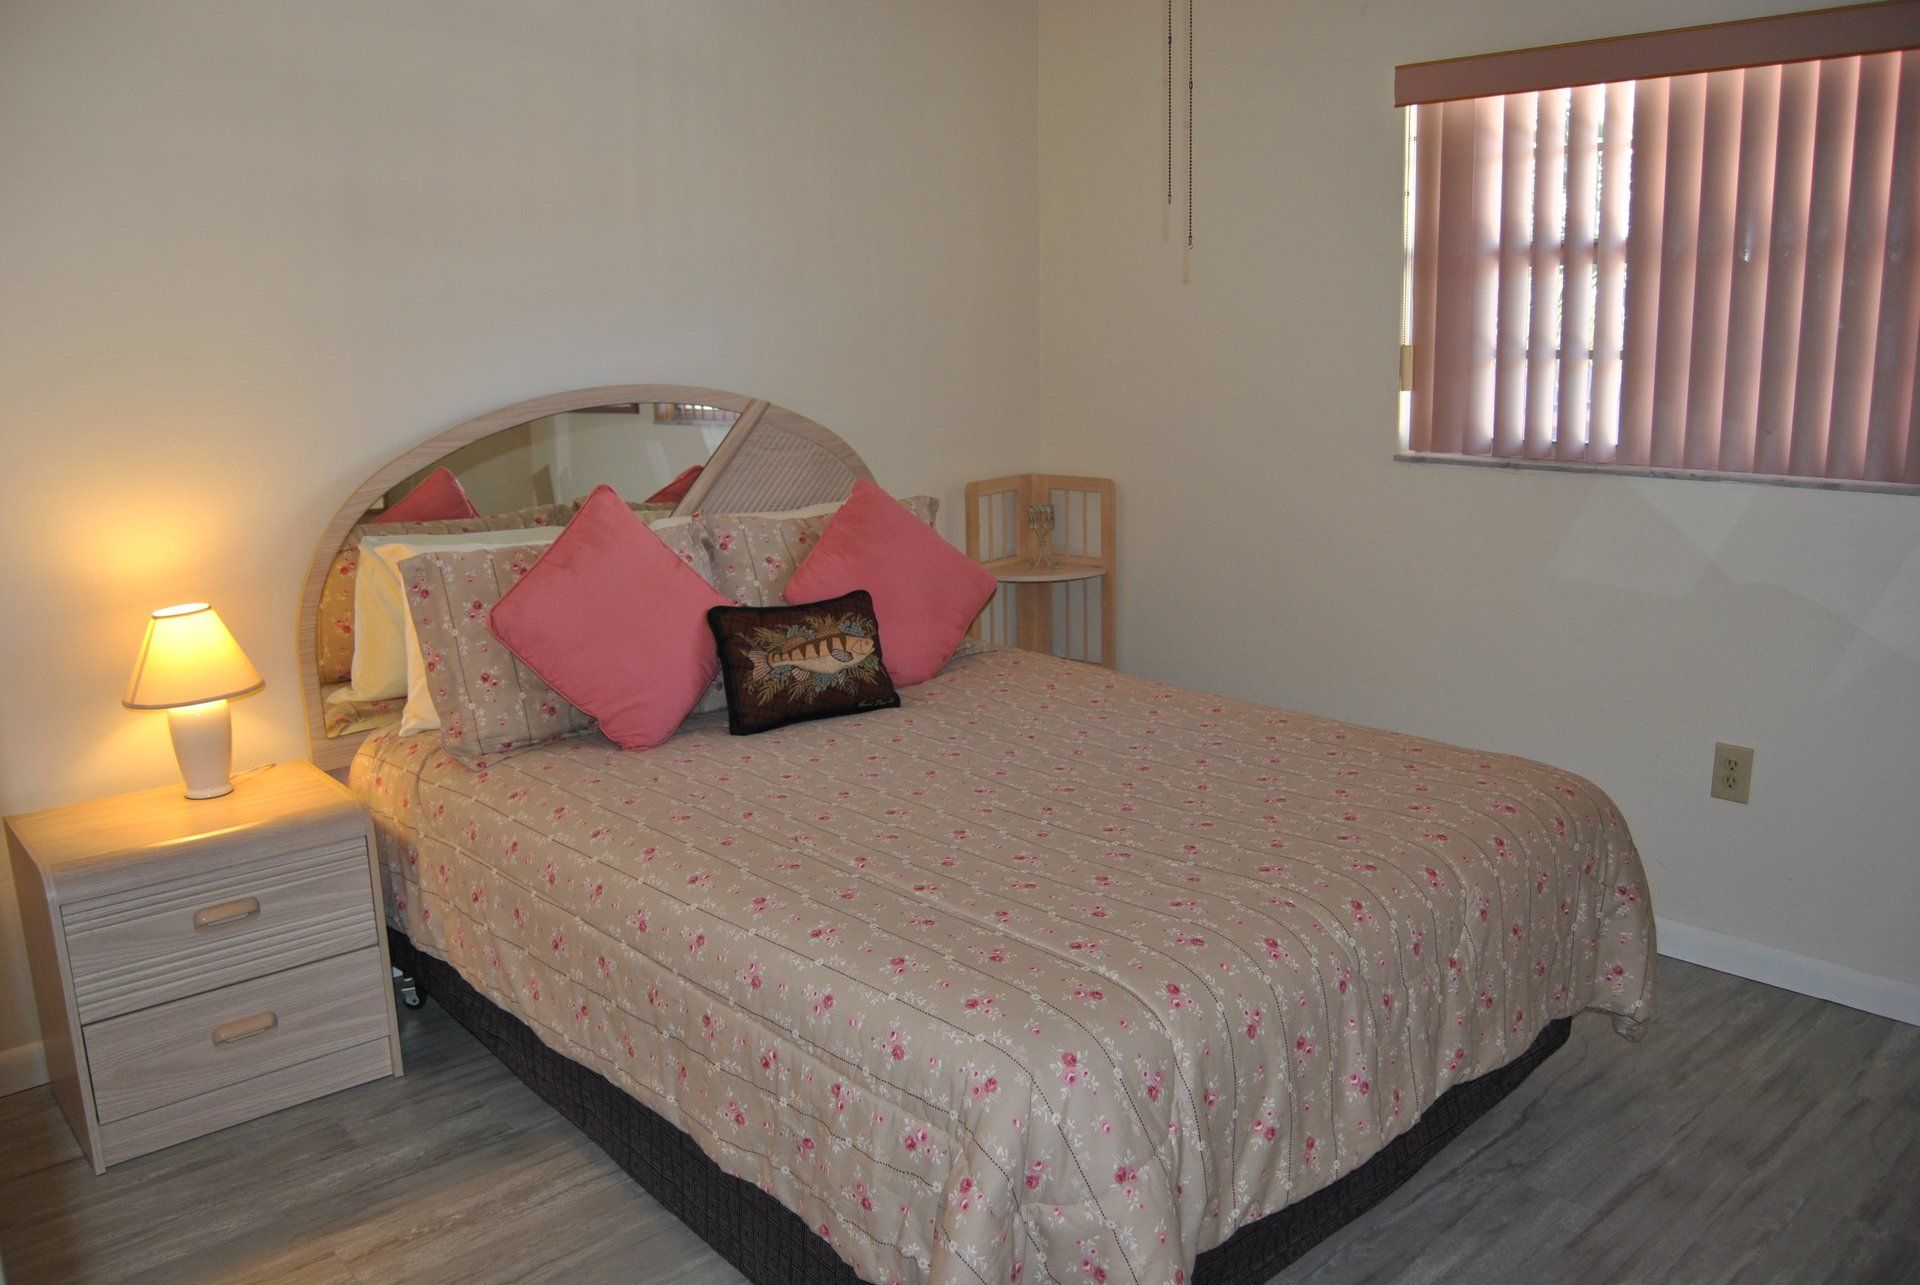 Full size bed with flowered cover, side table, pink shades